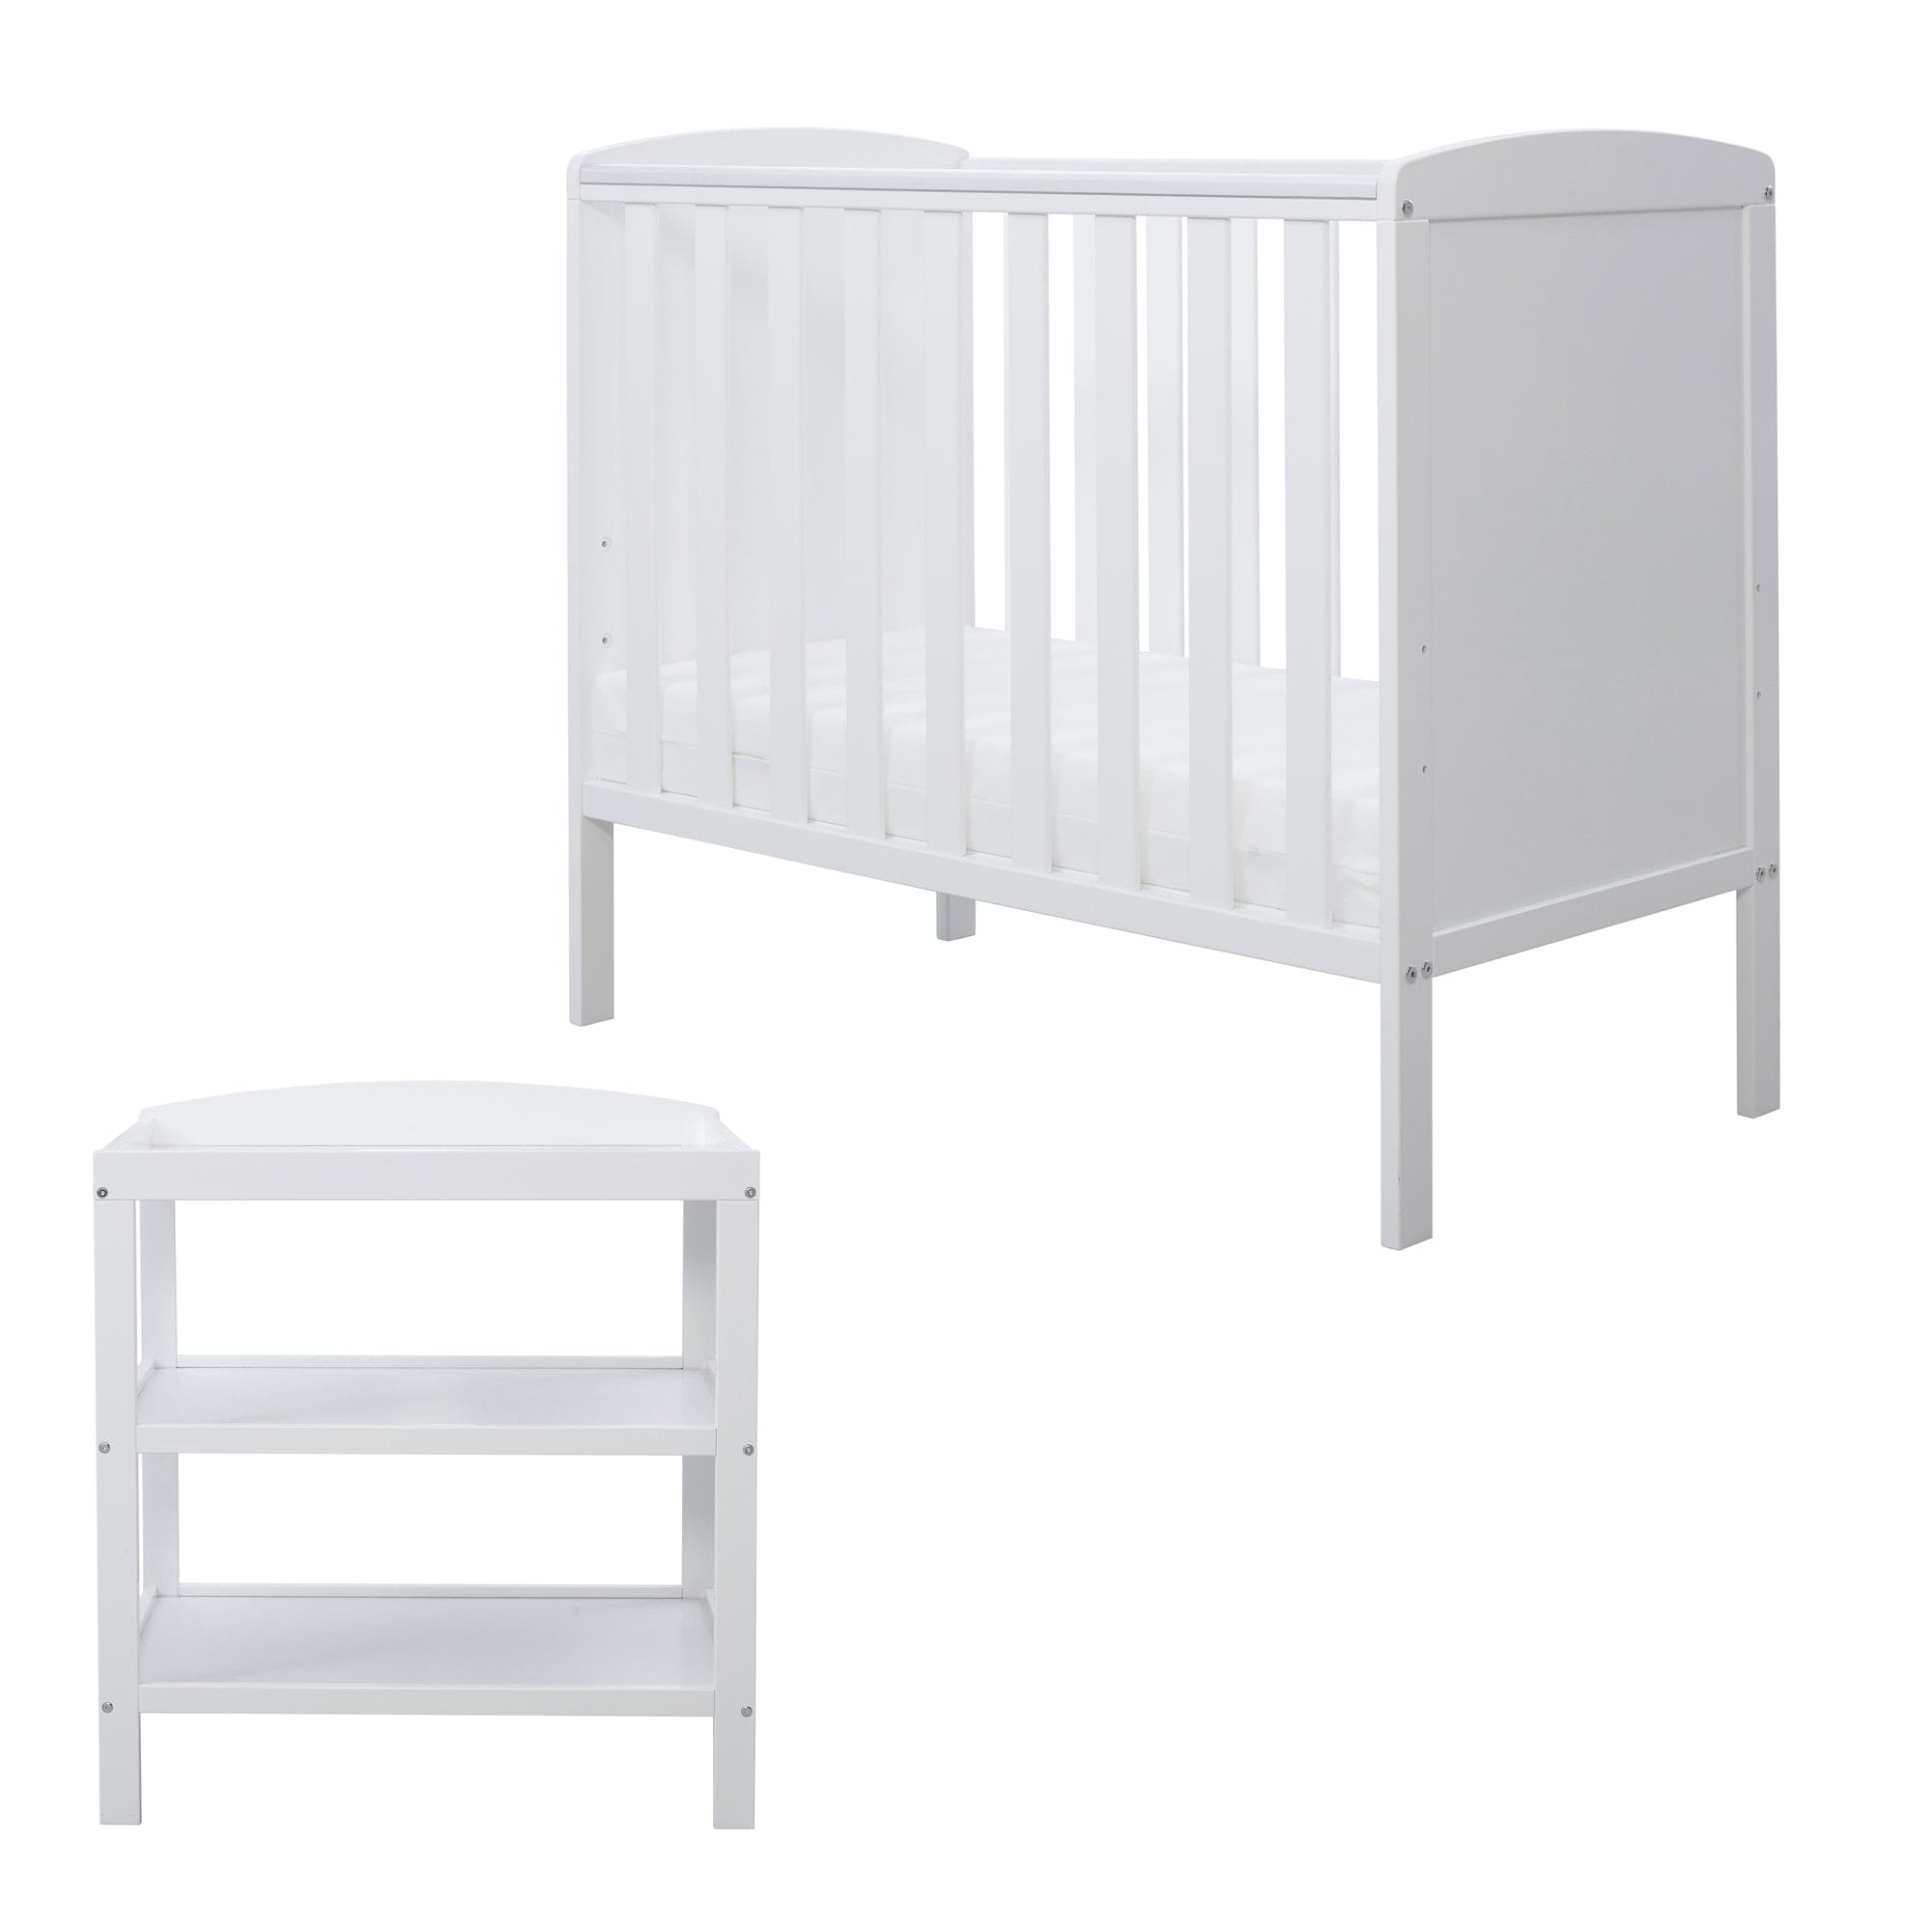 Ickle Bubba baby cots Ickle Bubba Coleby Space Saver 2 Piece Furniture Set White